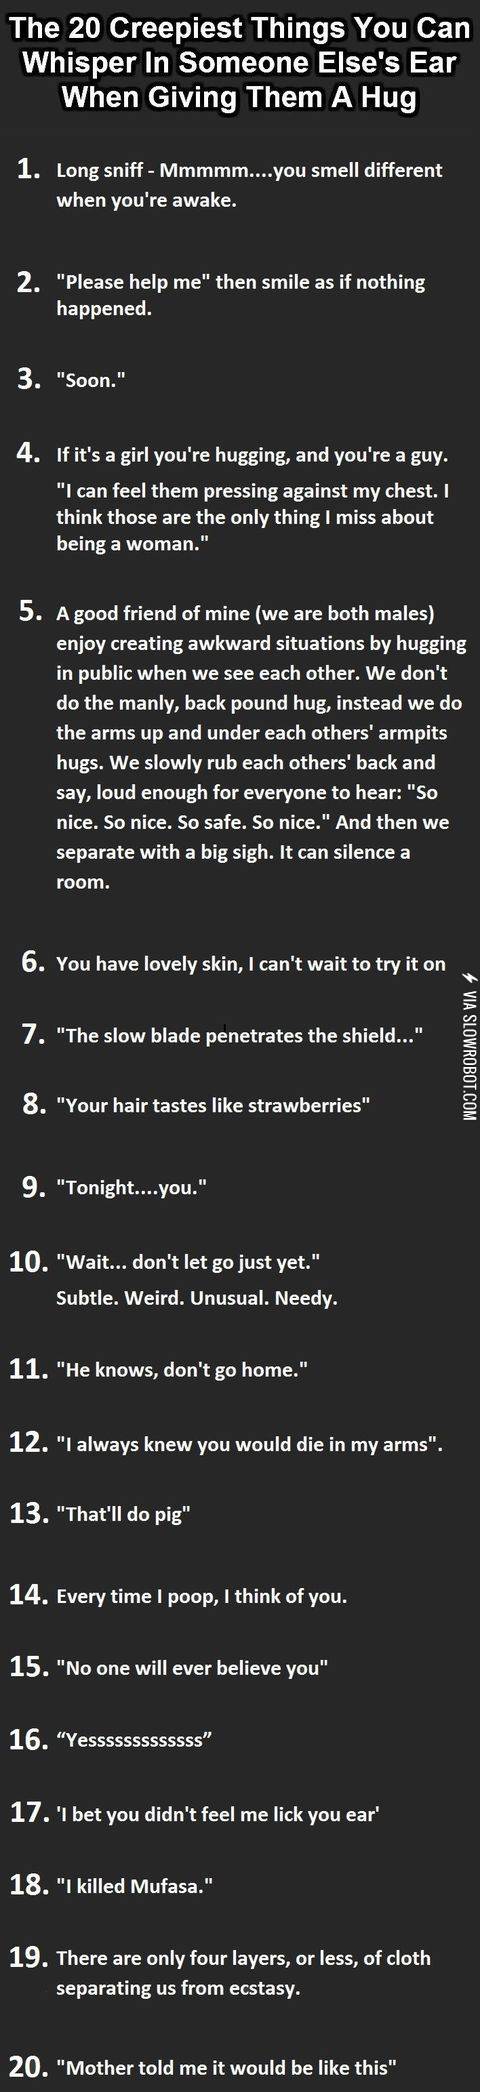 20 things to whisper into someone's ear.